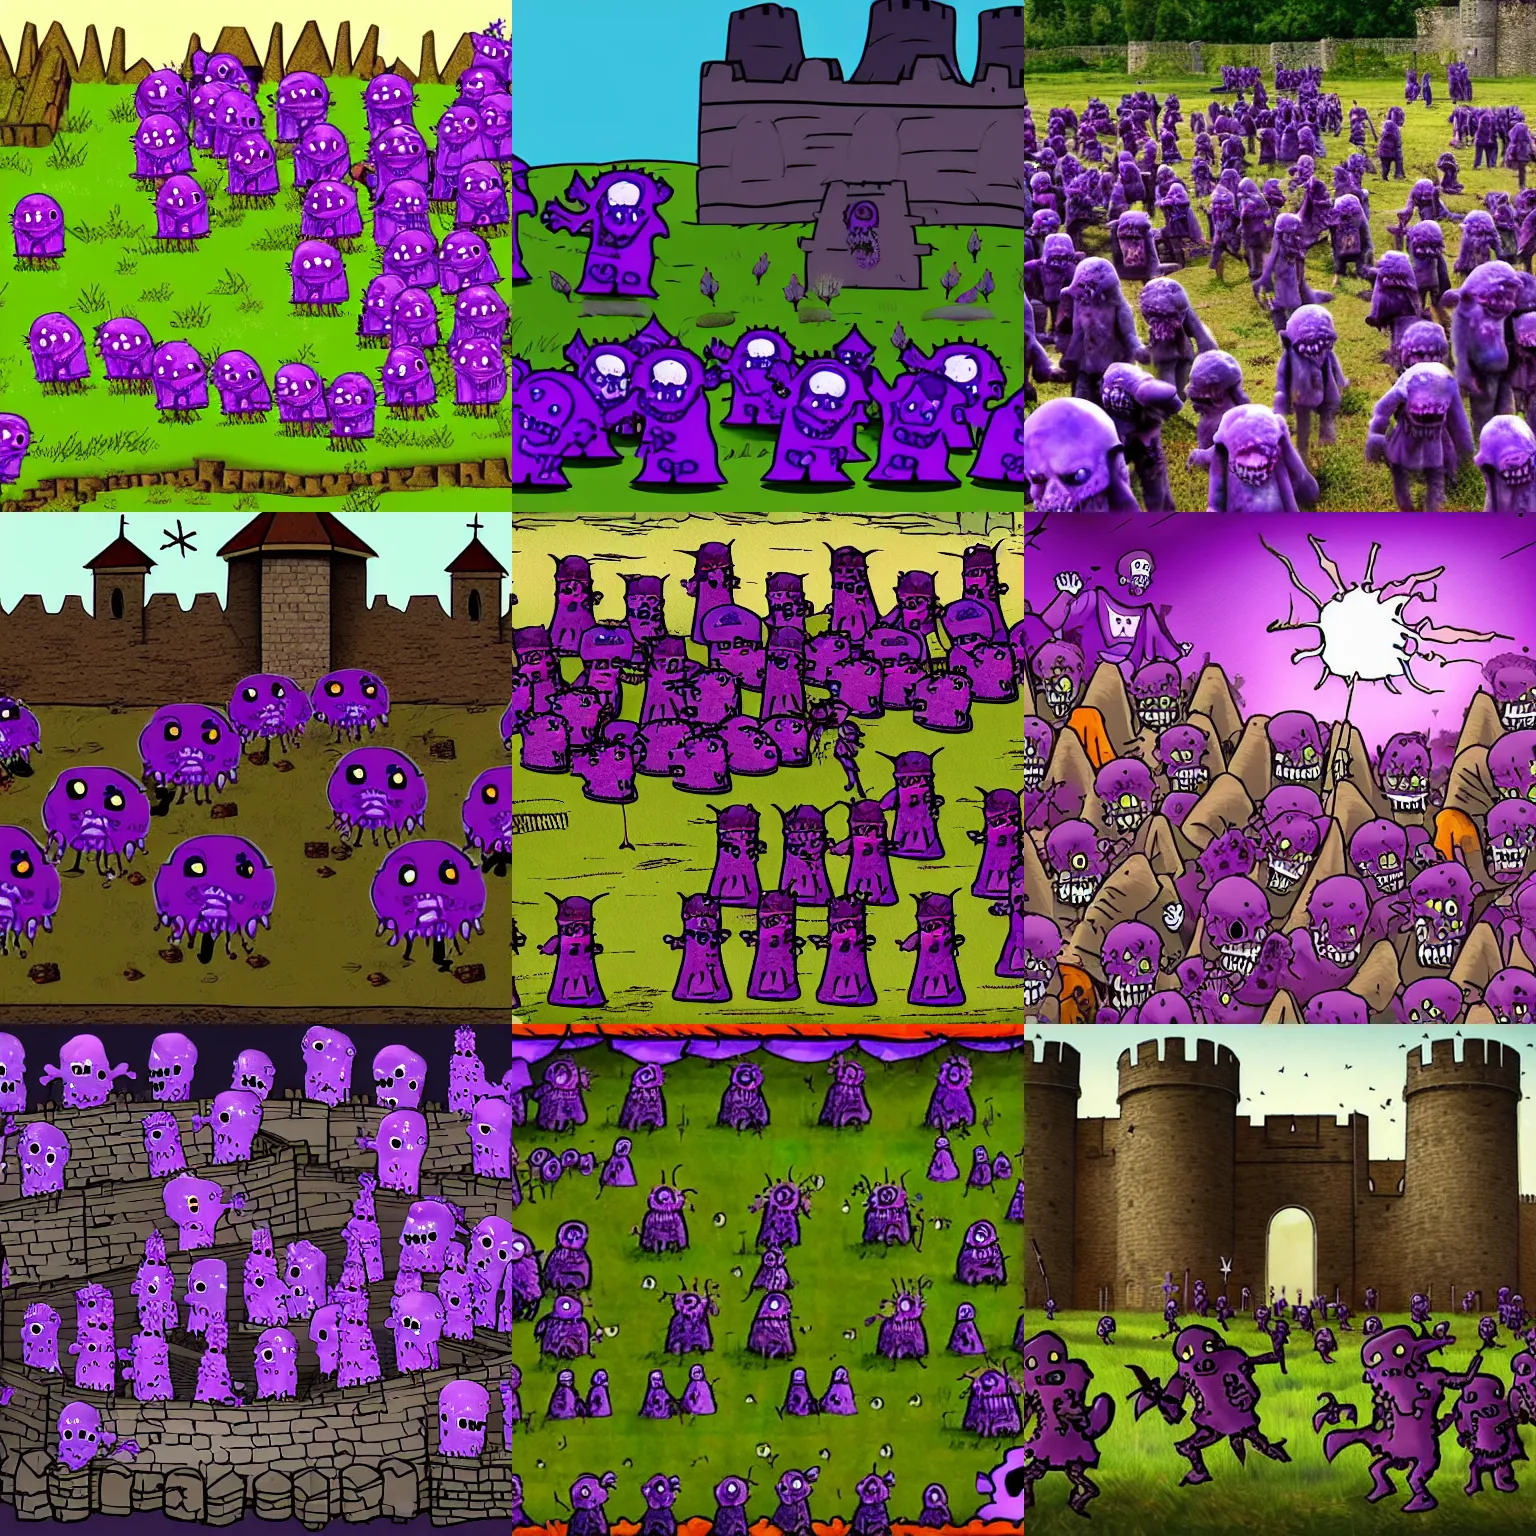 Prompt: Medieval fortress being attacked by a horde of purple zombies